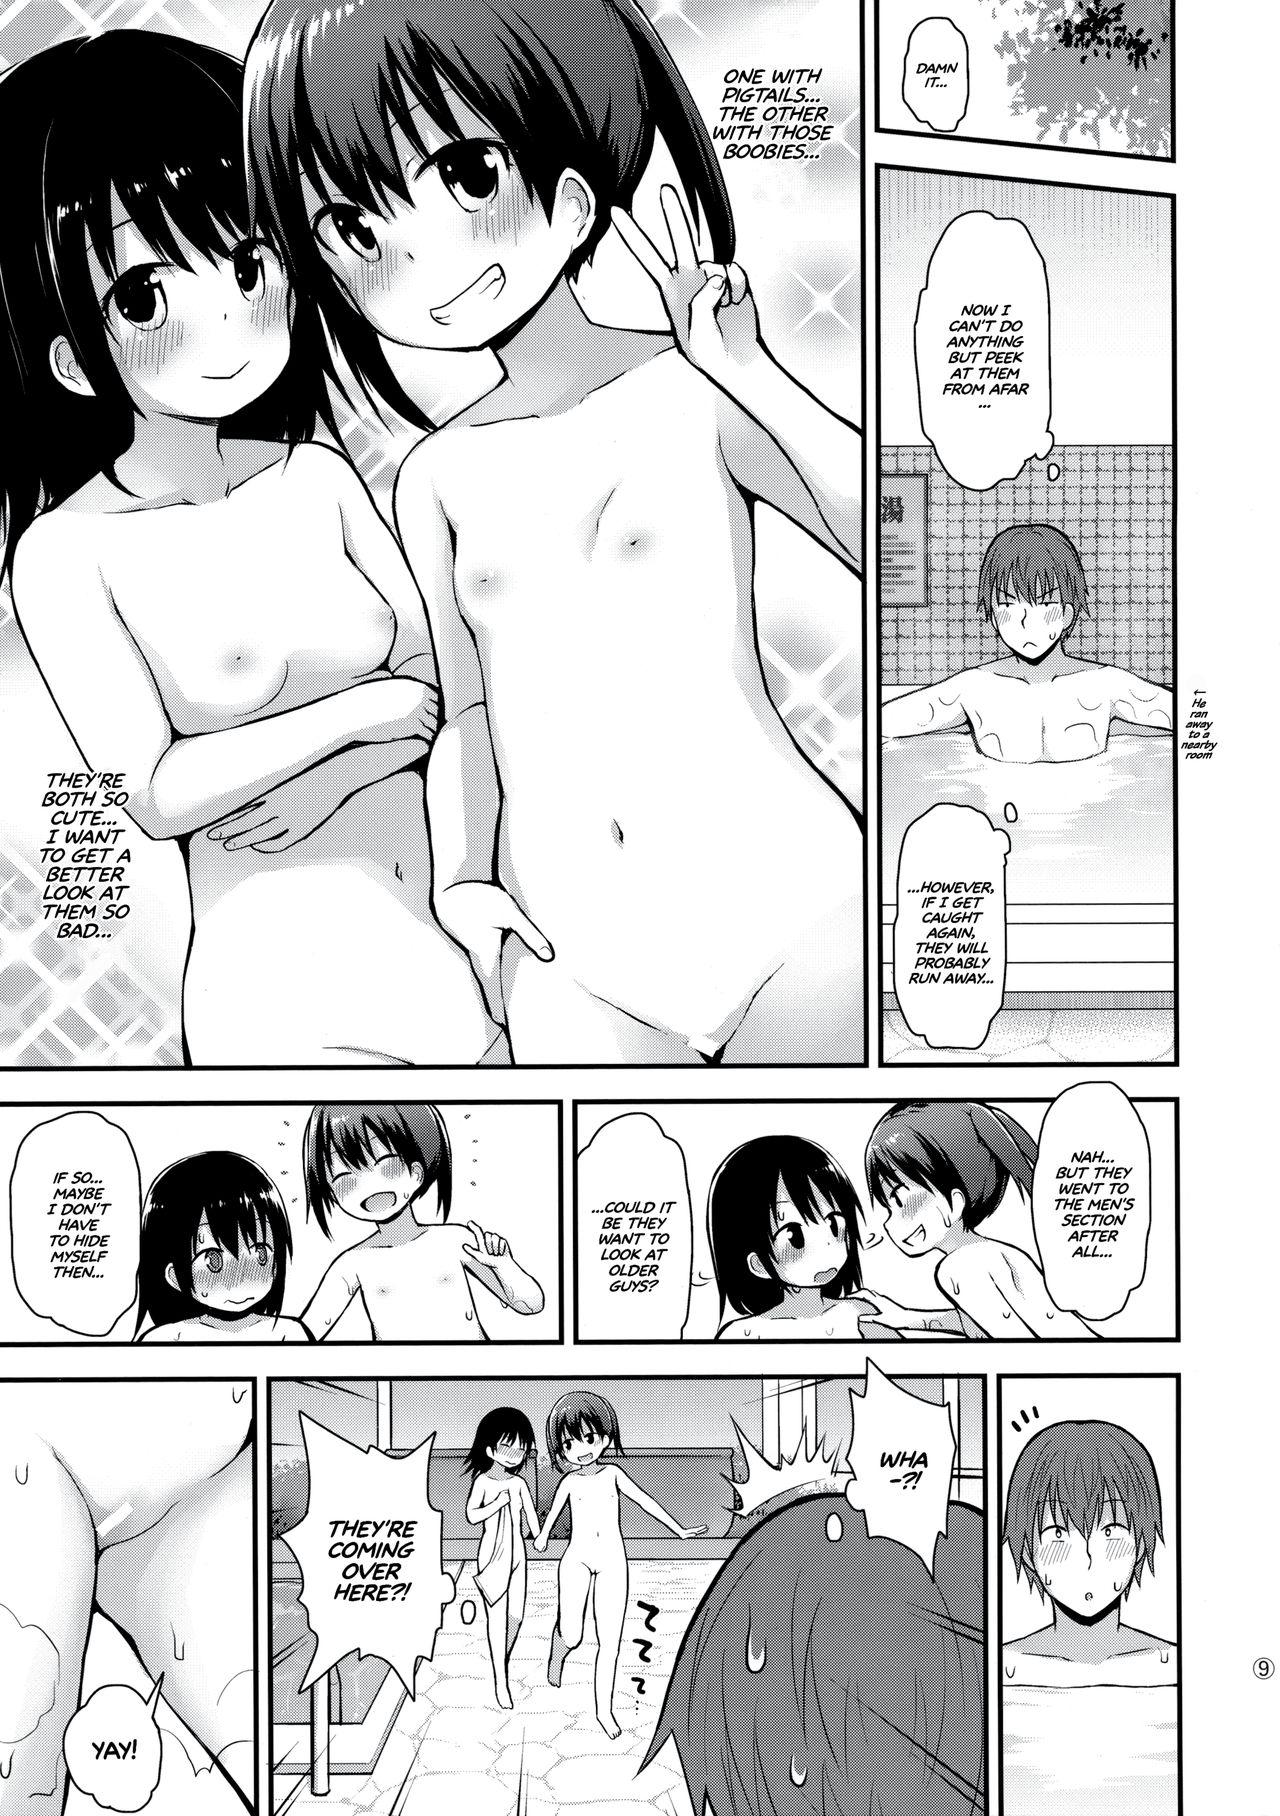 Clitoris Onnanoko datte Otokoyu ni Hairitai | They may just be little girls, but they still want to enter the men's bath! - Original Pissing - Page 8